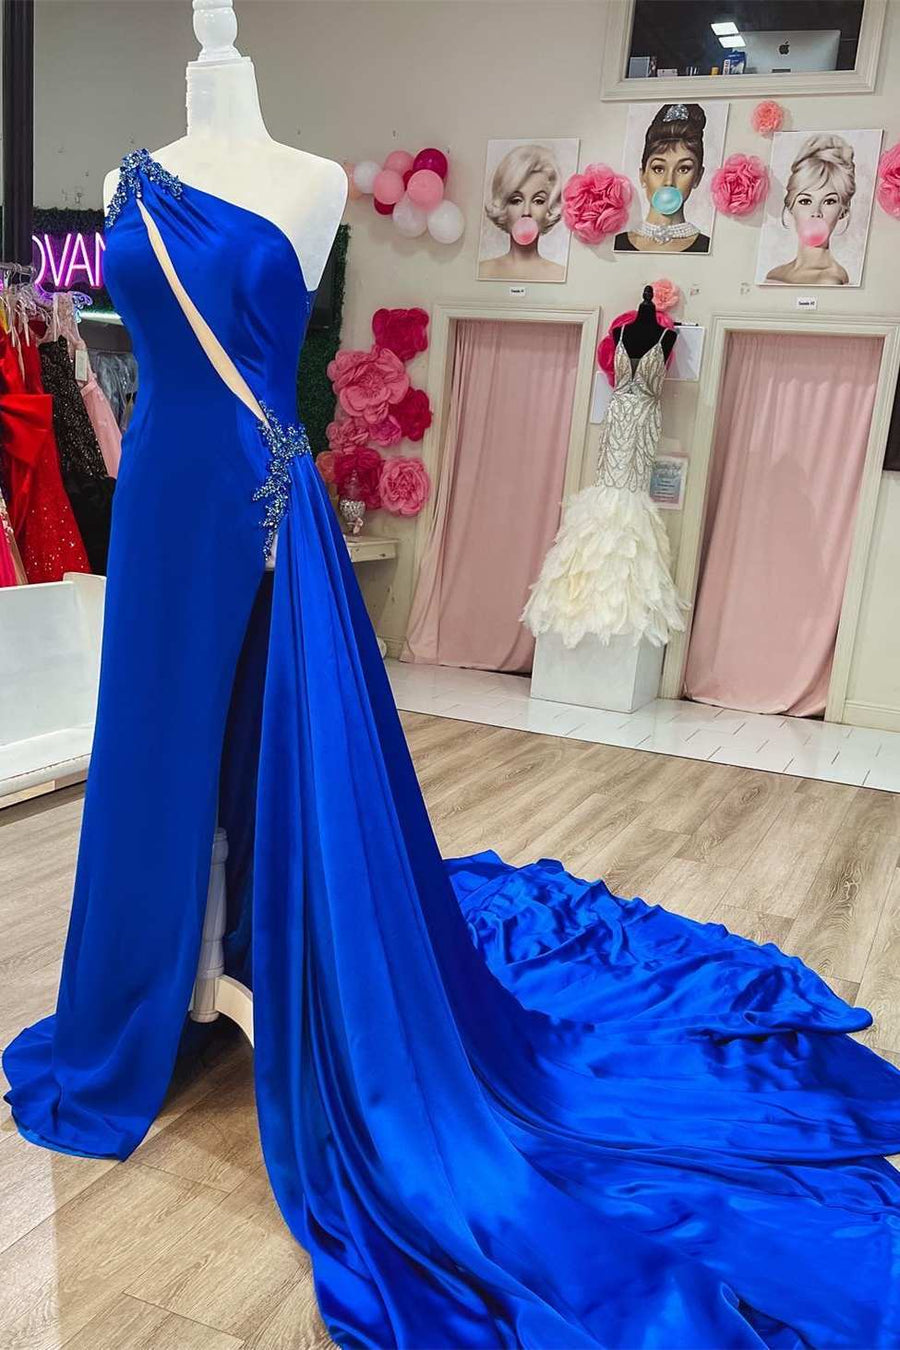 Royal Blue Beaded Keyhole Long Formal Dress with Attached Train